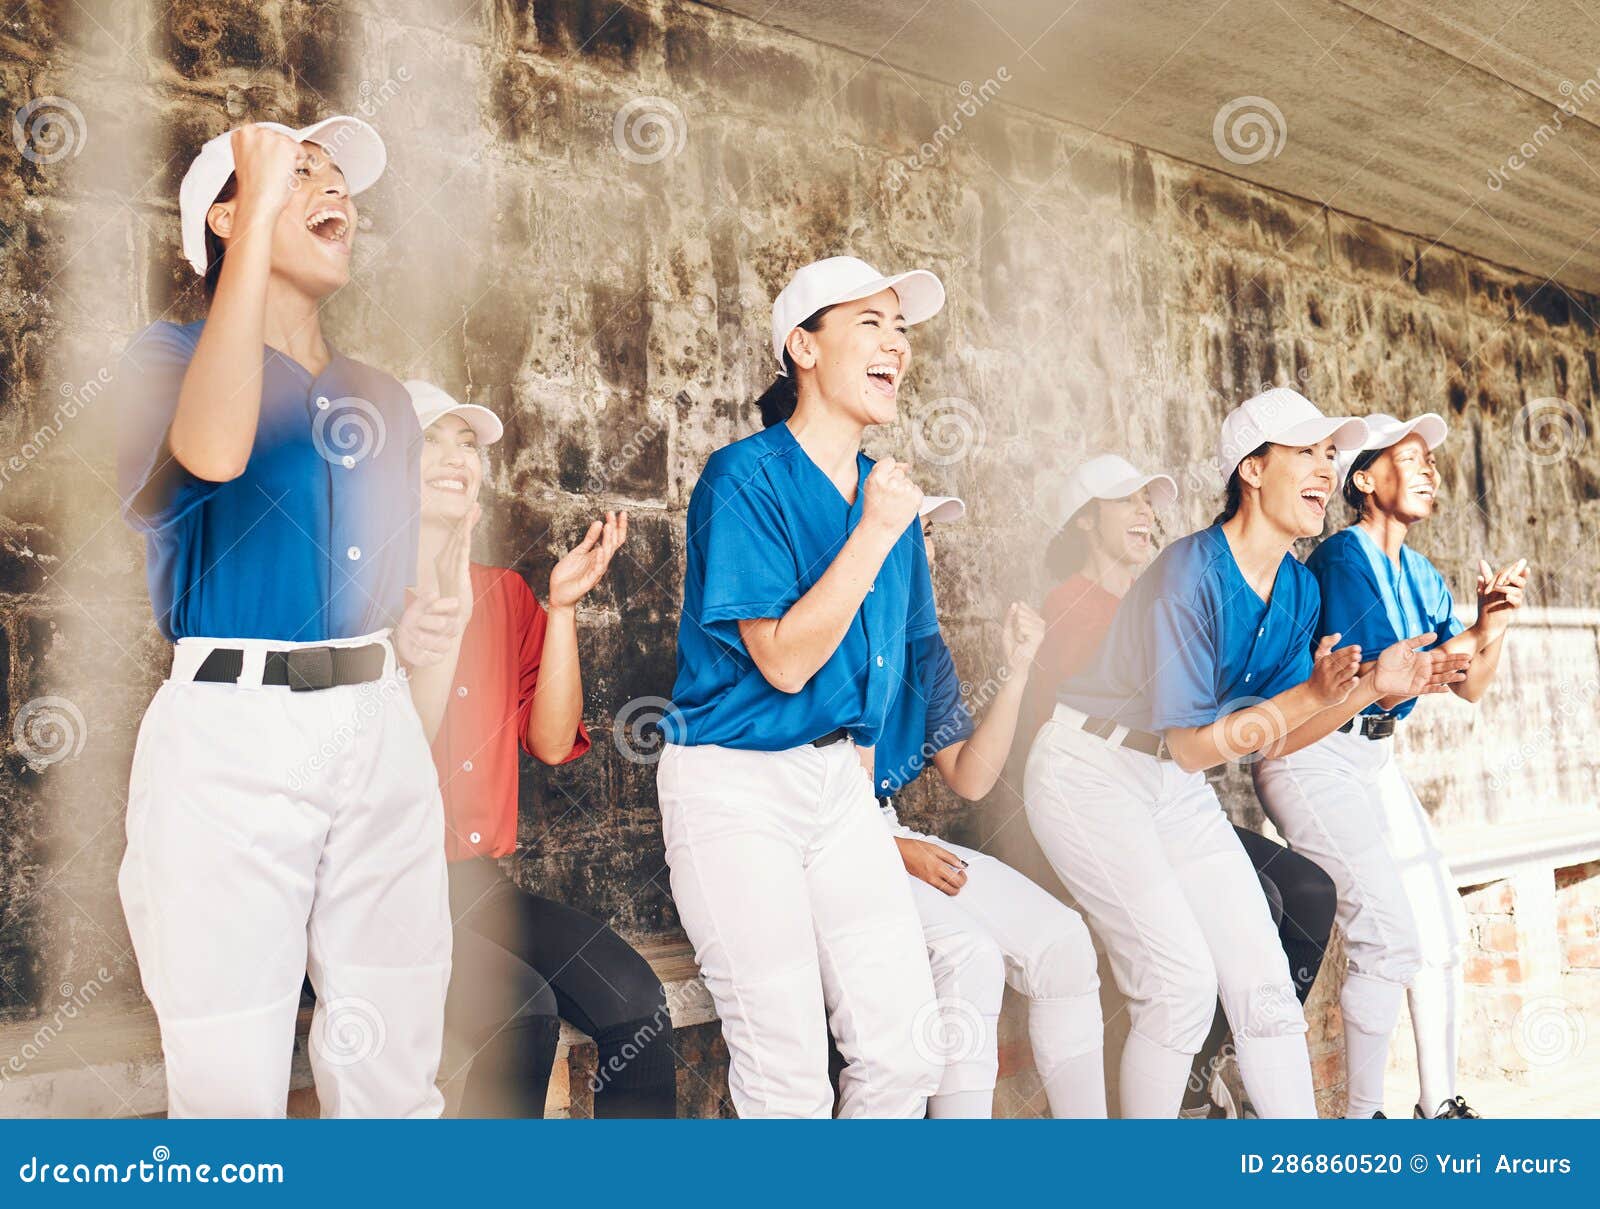 sports, baseball player or excited team celebrate teamwork, achievement and cheers for homerun. group, dugout row or